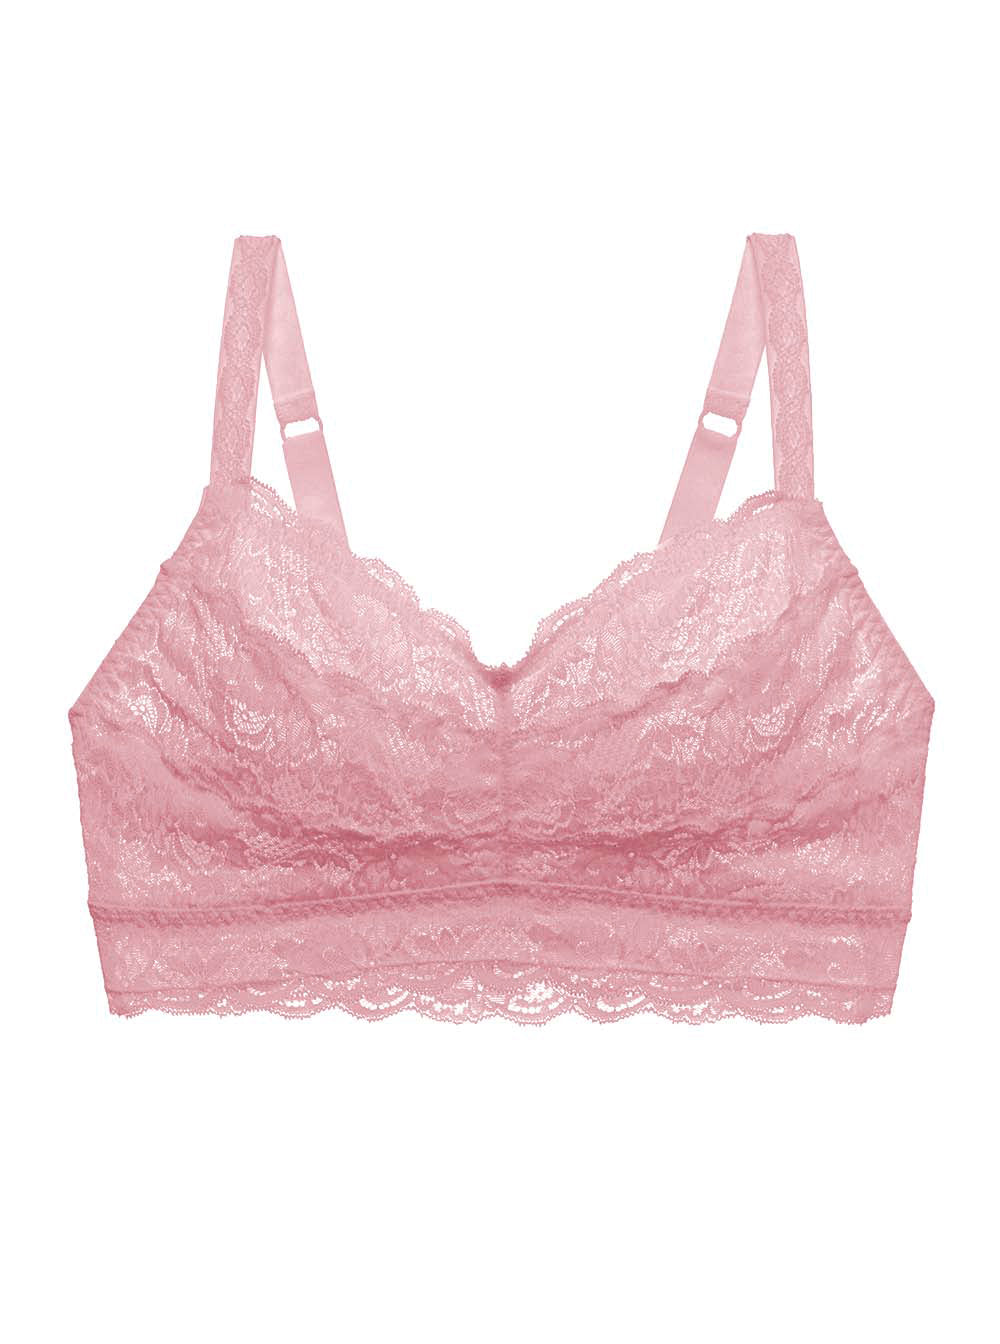 Cosabella, Never Say Never Bralette Petite Sweetie